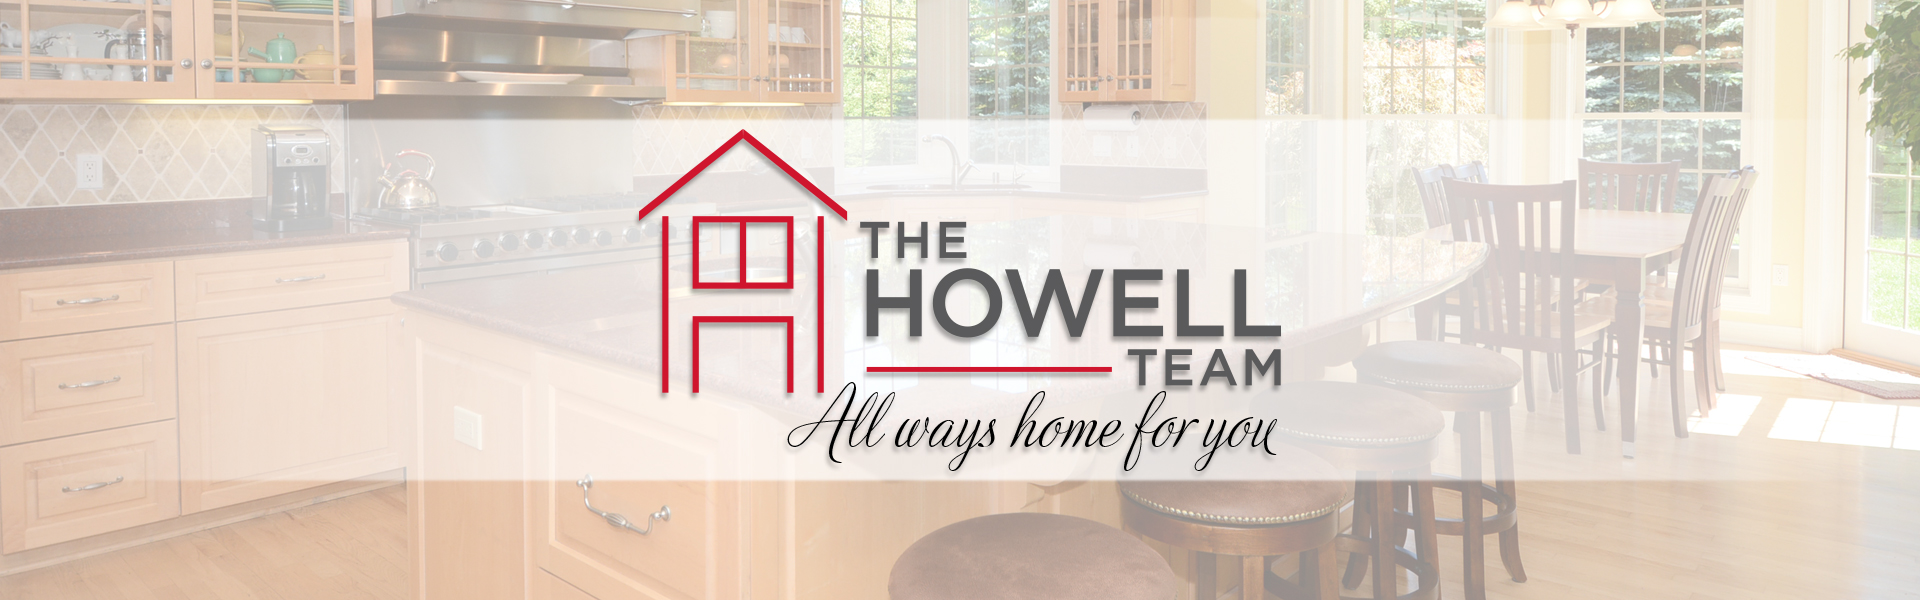 The Howell Team